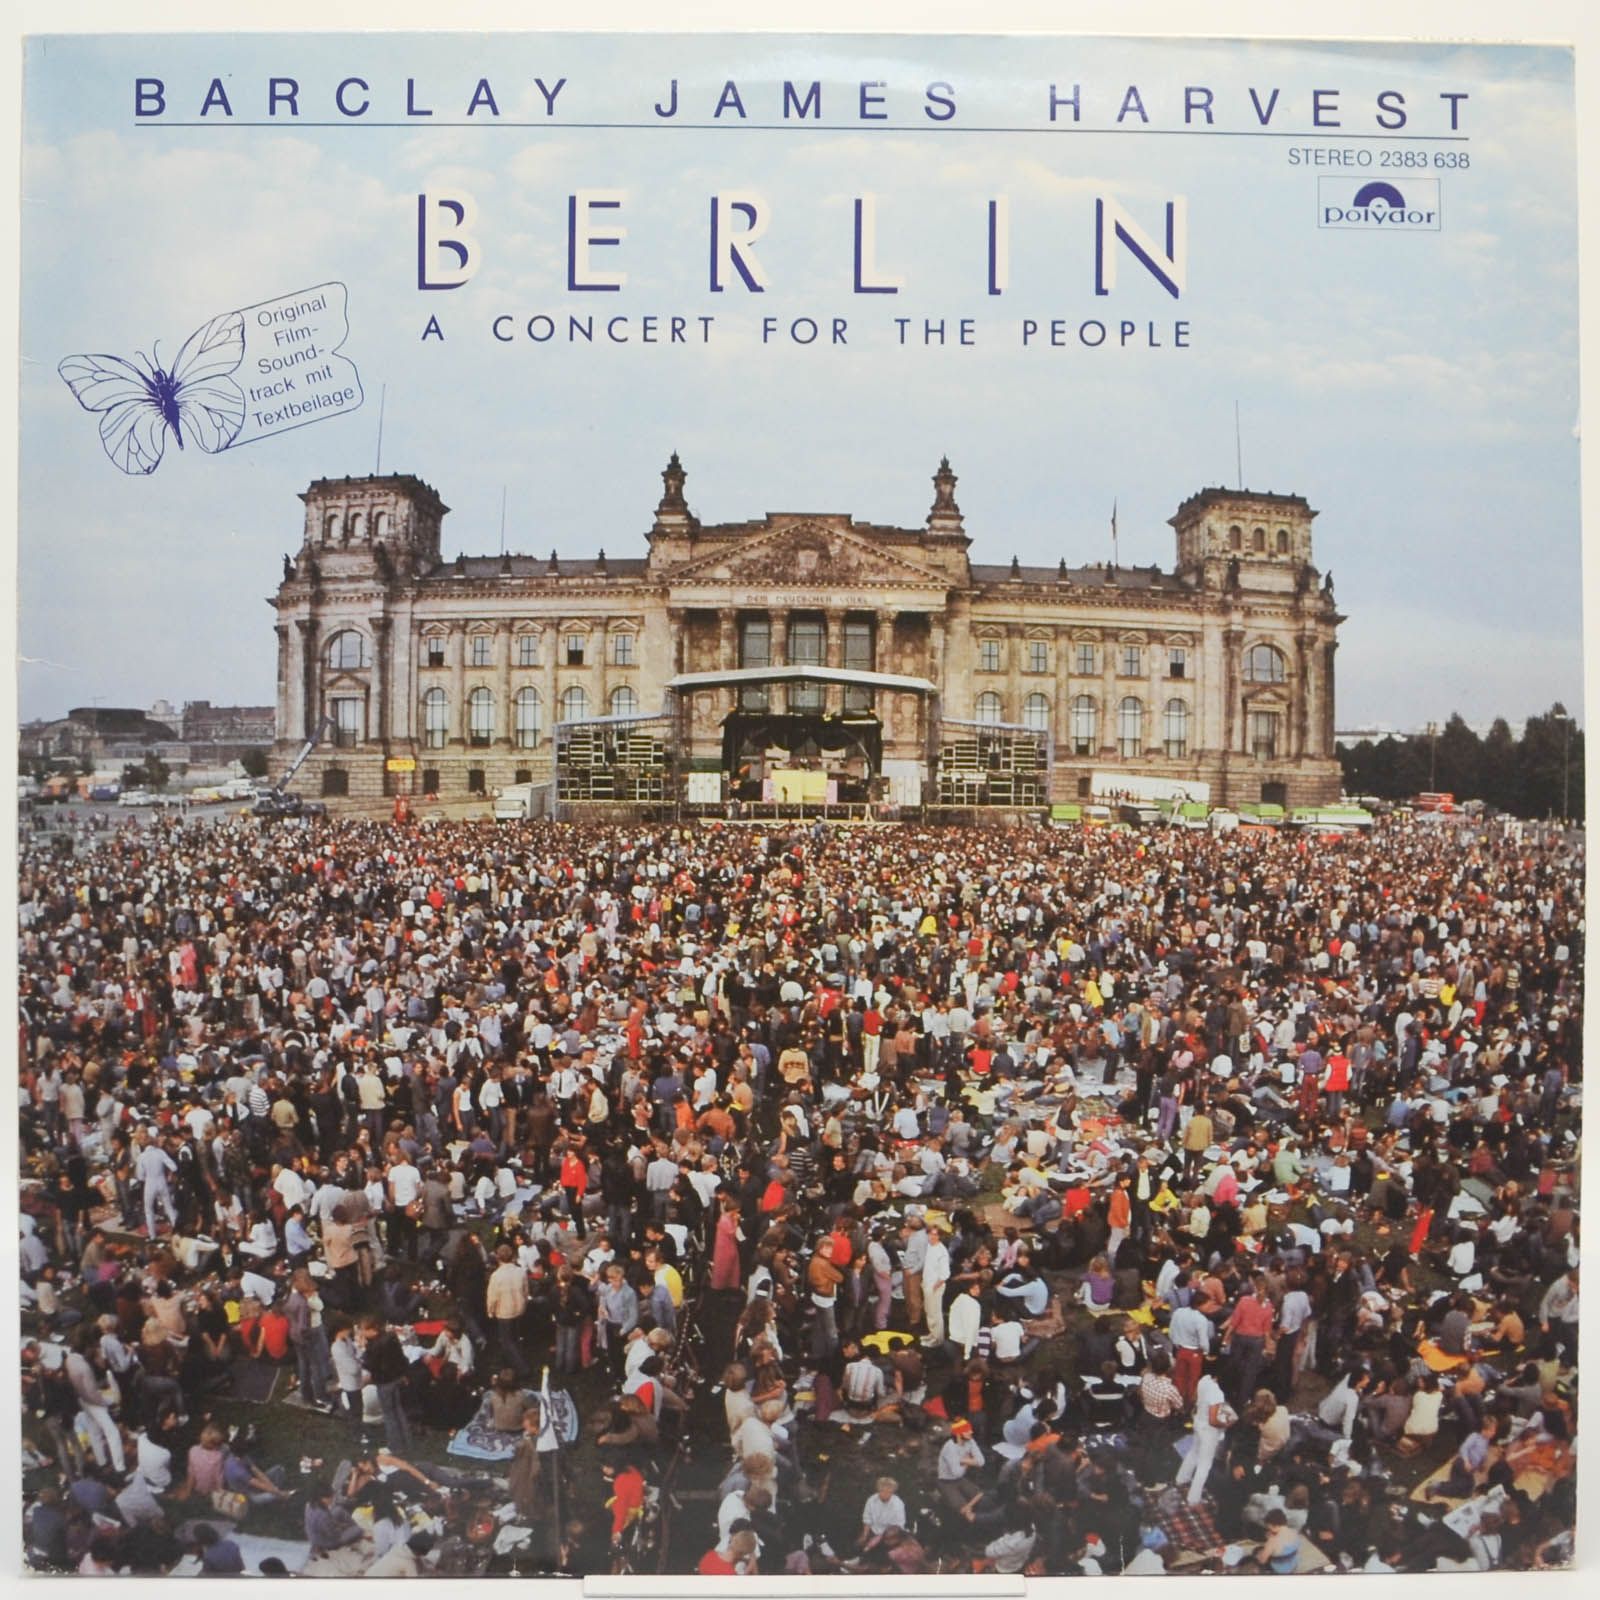 Barclay James Harvest — Berlin - A Concert For The People, 1982